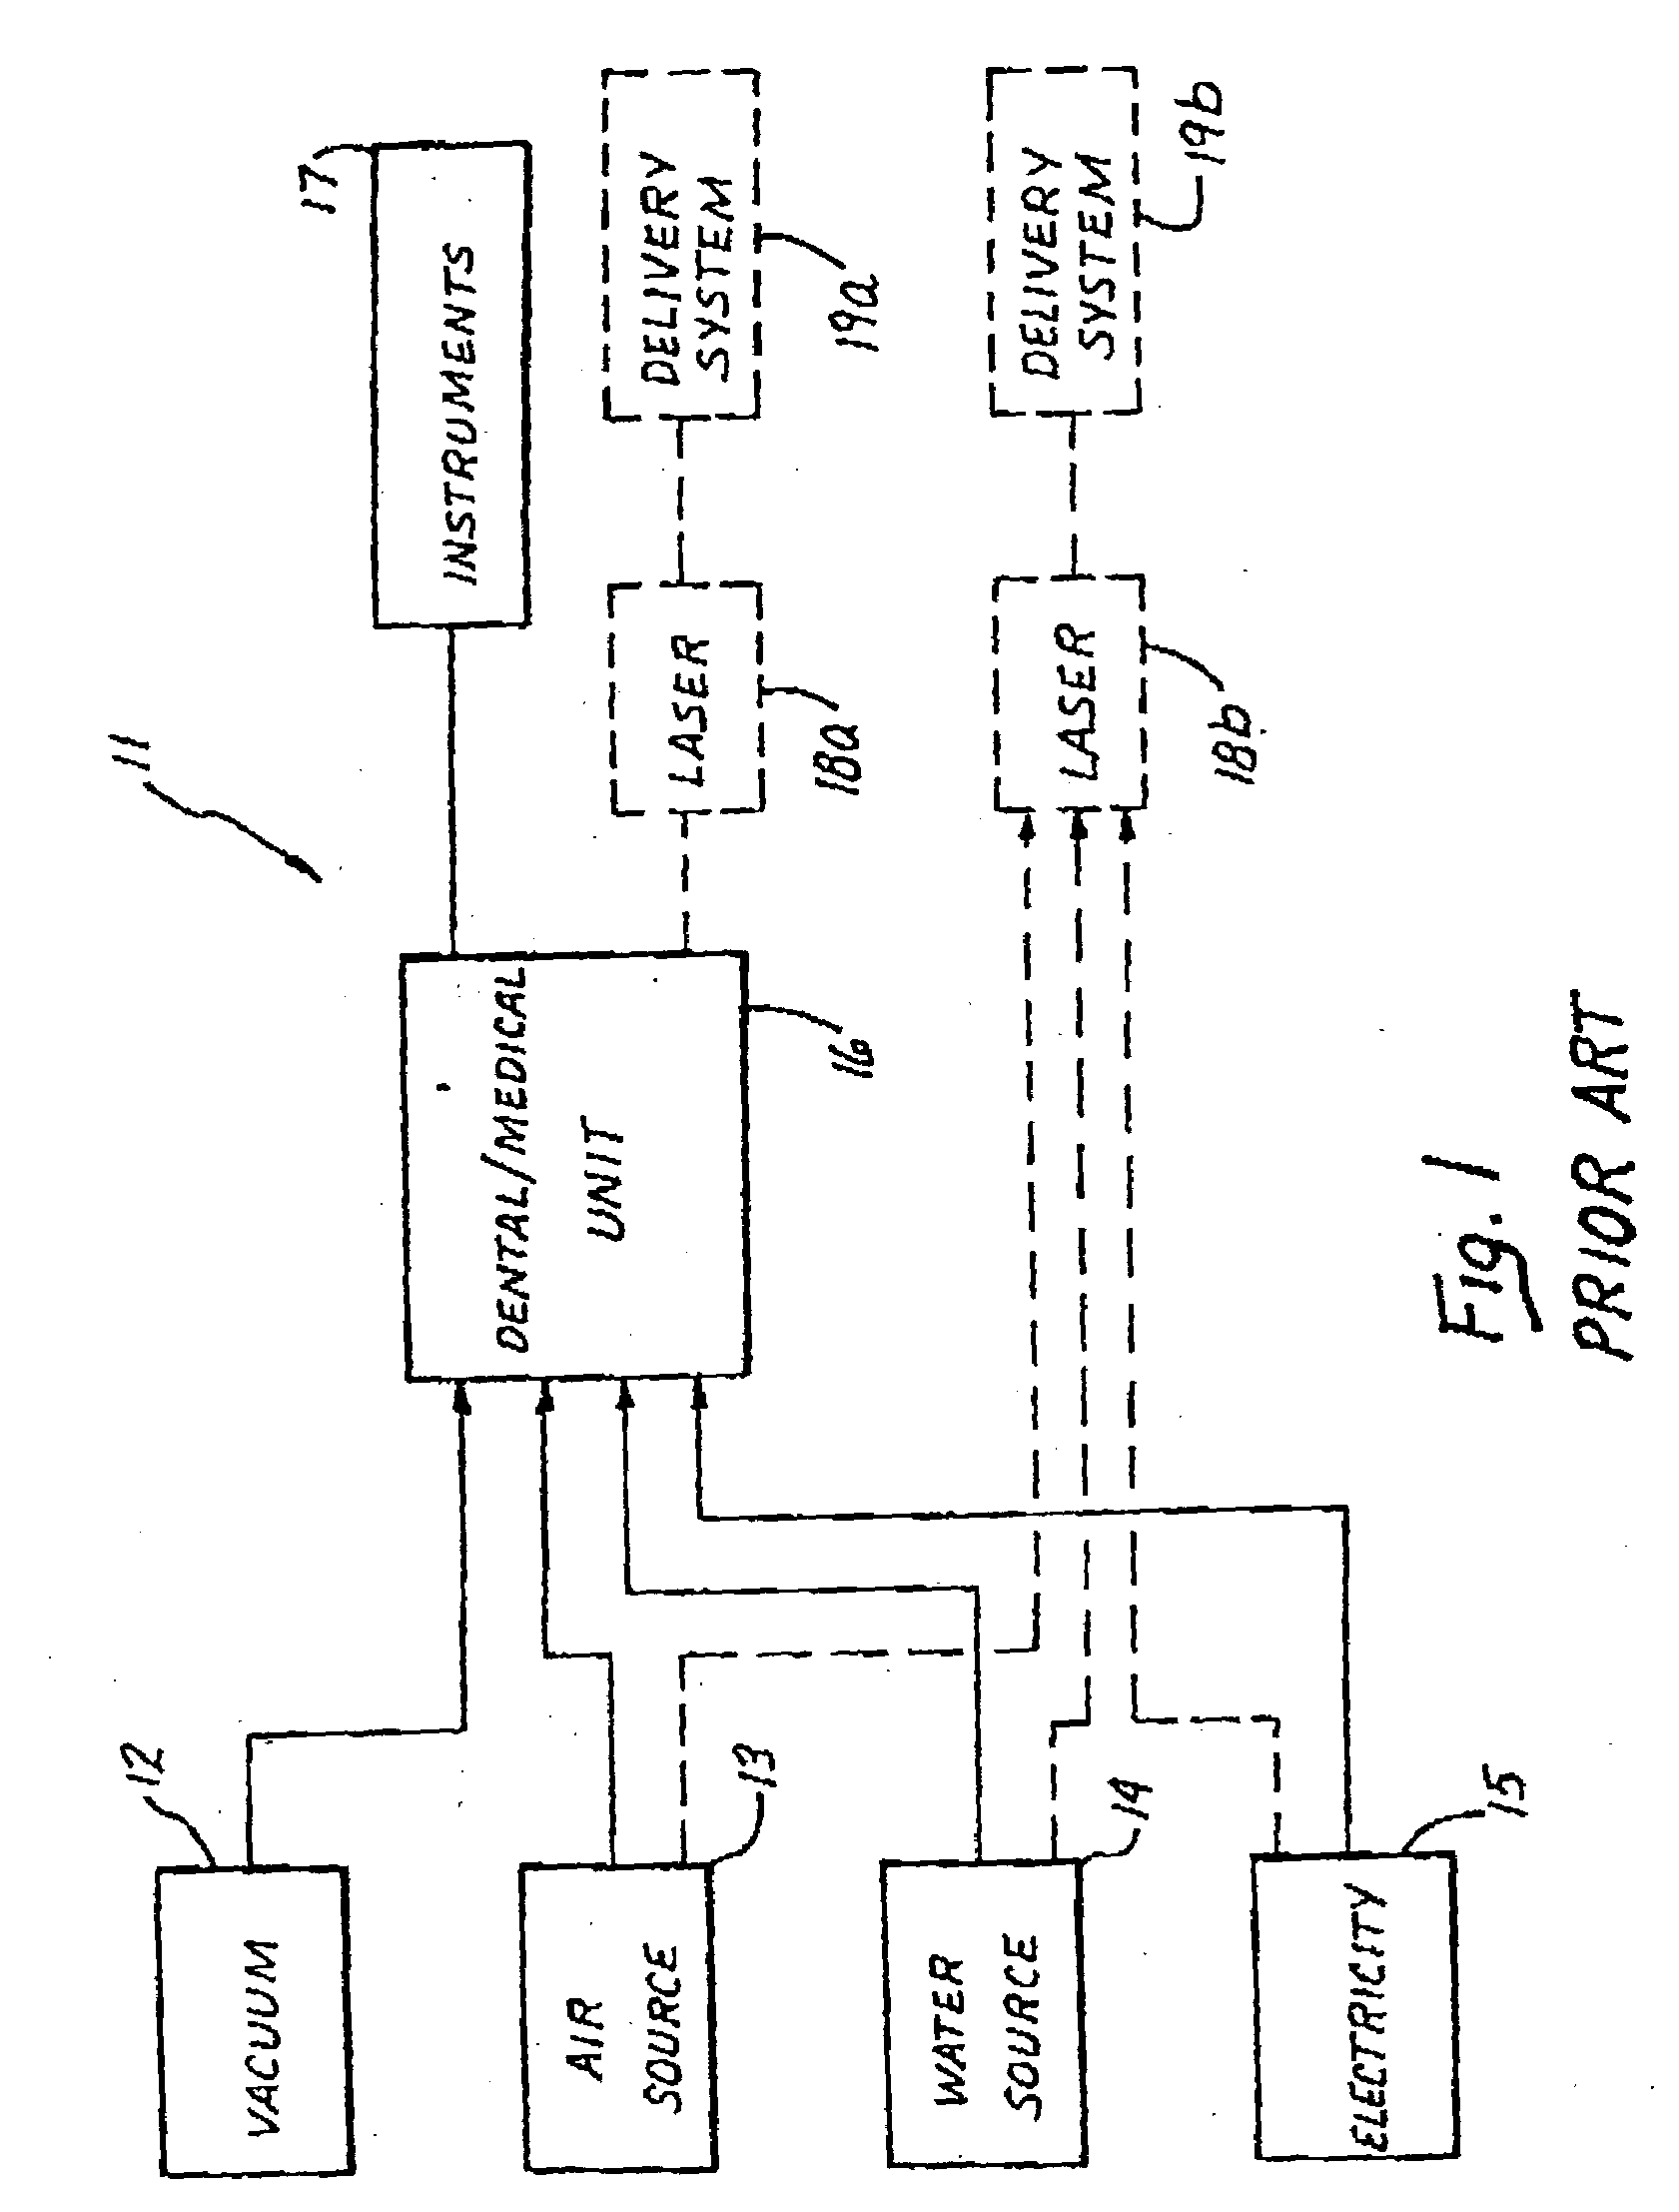 Fluid and pulsed energy output system